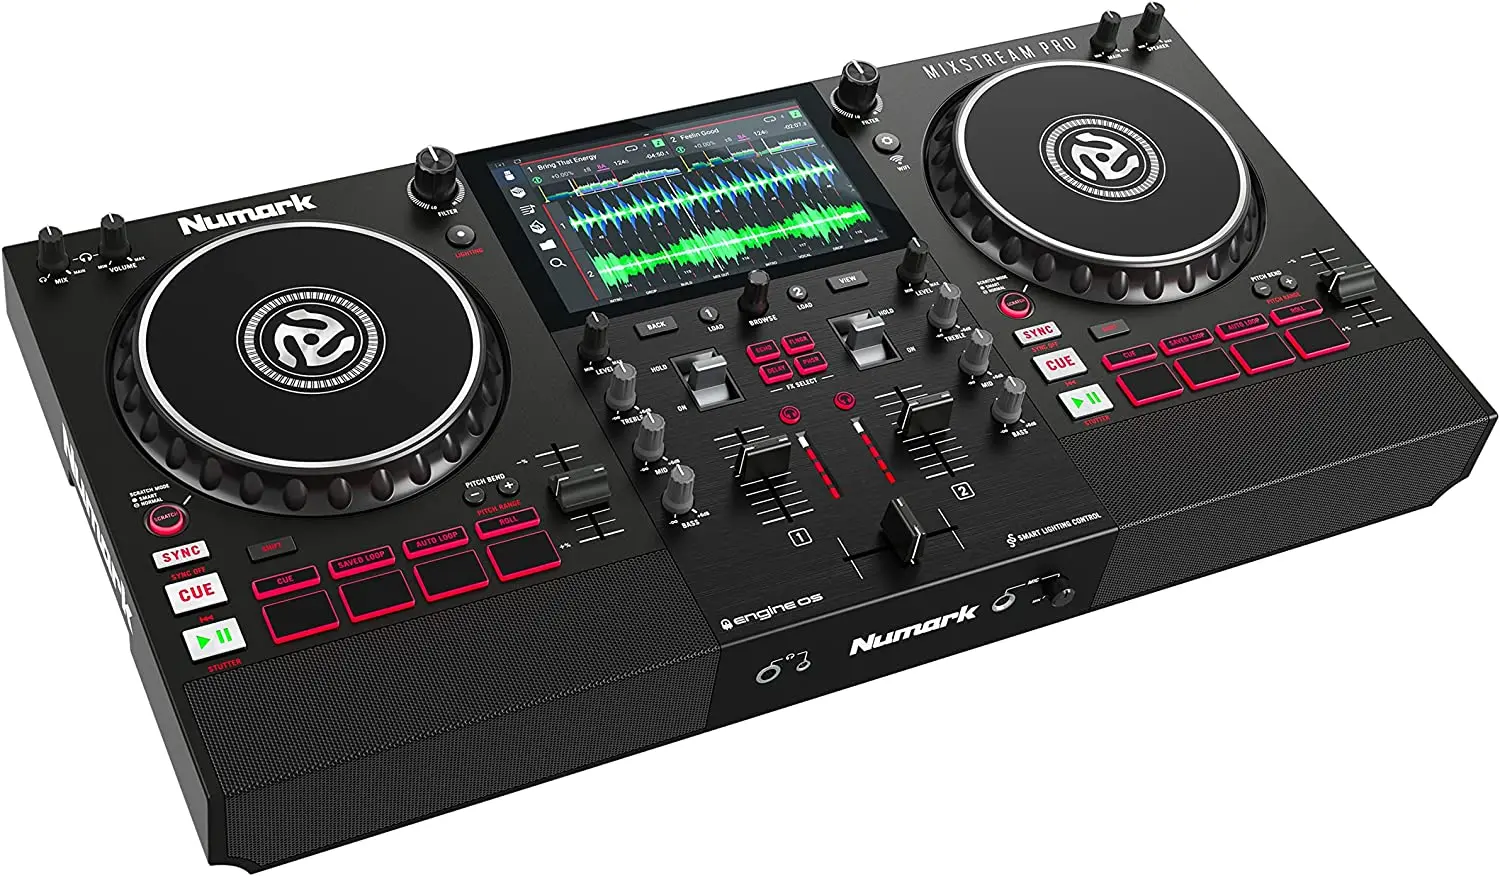 

HOT SALES Numark Mixstream Pro Standalone DJ Controller with Speakers, 7” Touch Screen, WiFi Streaming, Smart Light Controls, 6”